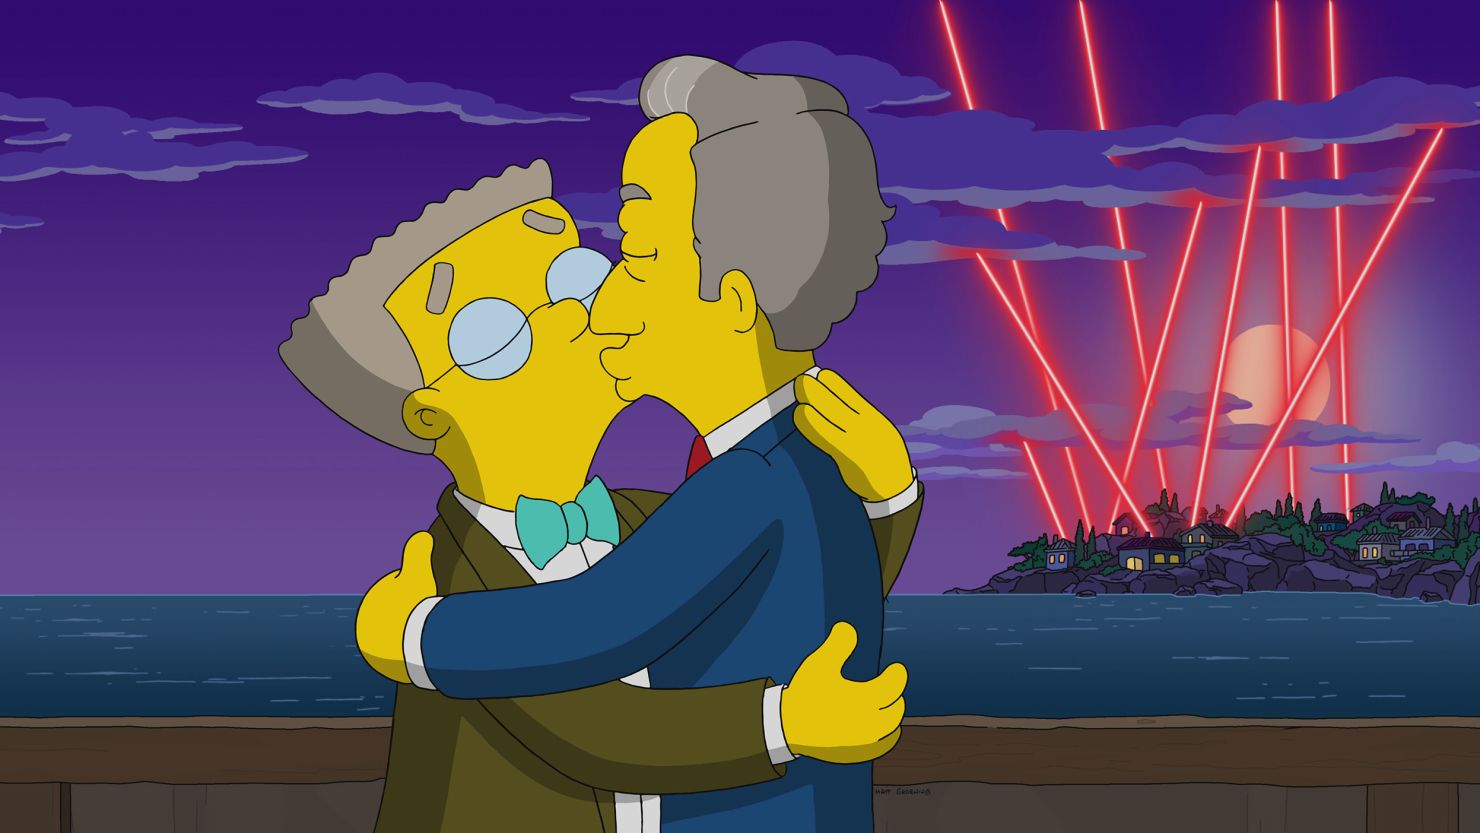 Smithers finds true love with a famous fashion designer (voiced by Victor Garber).